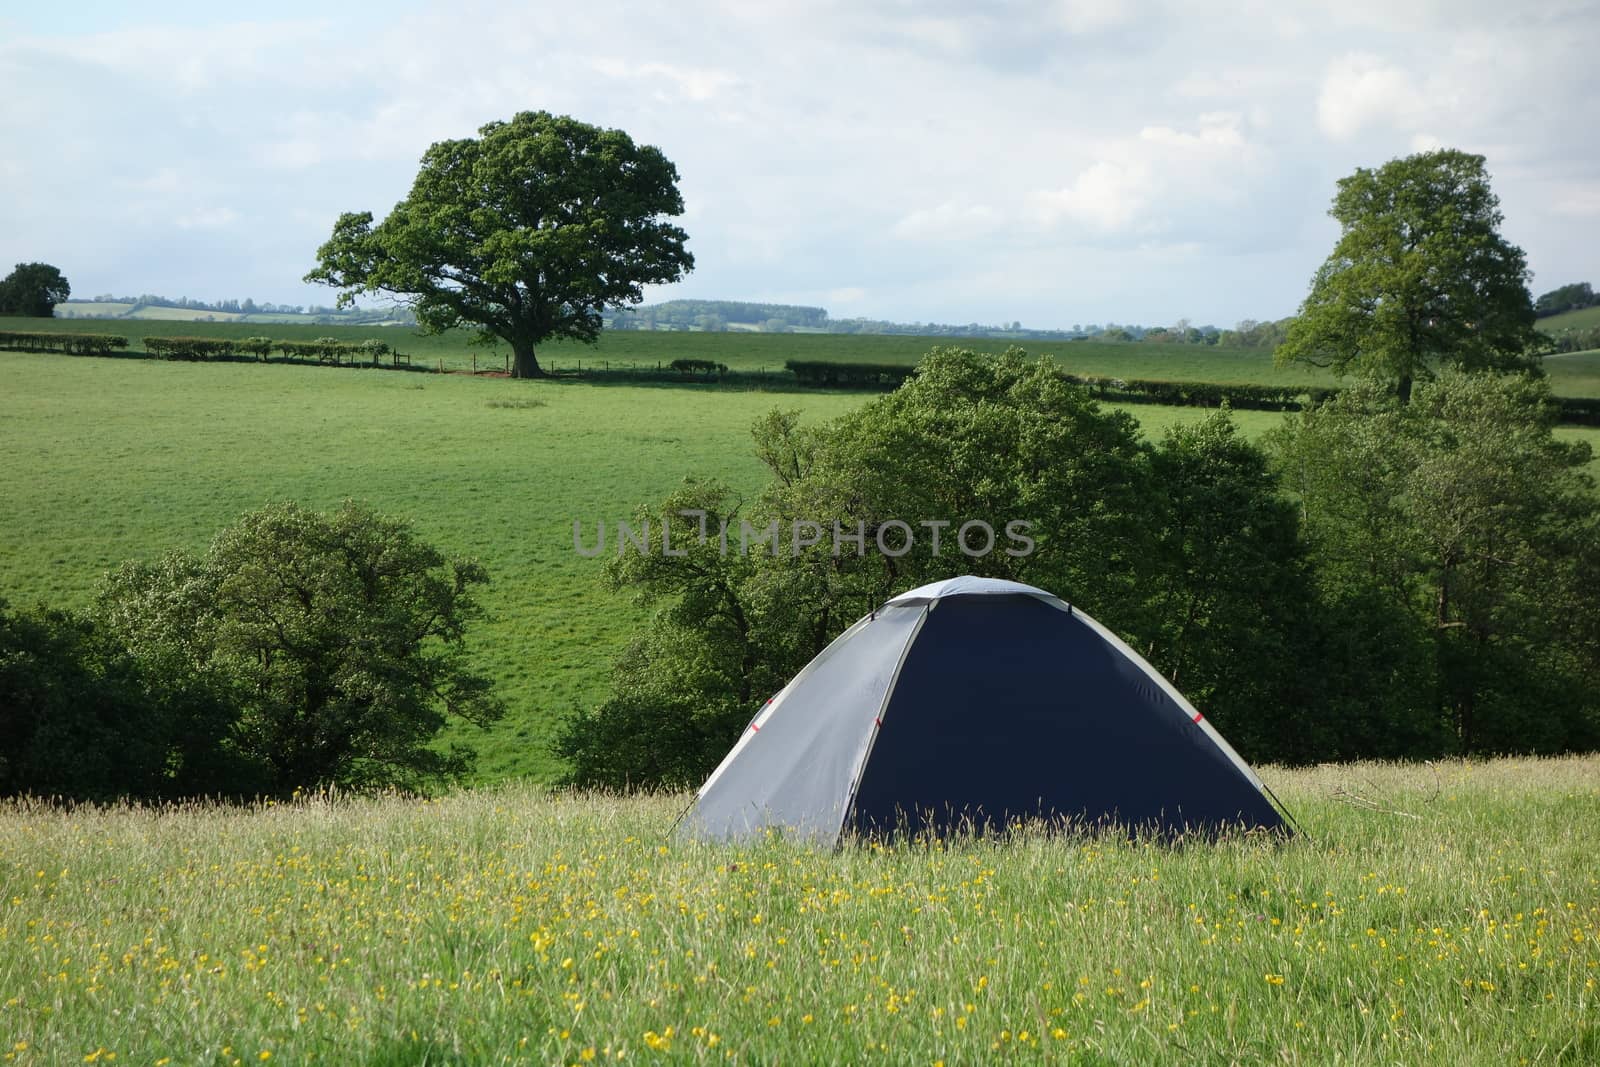 Tent in field amongst rolling countryside, England